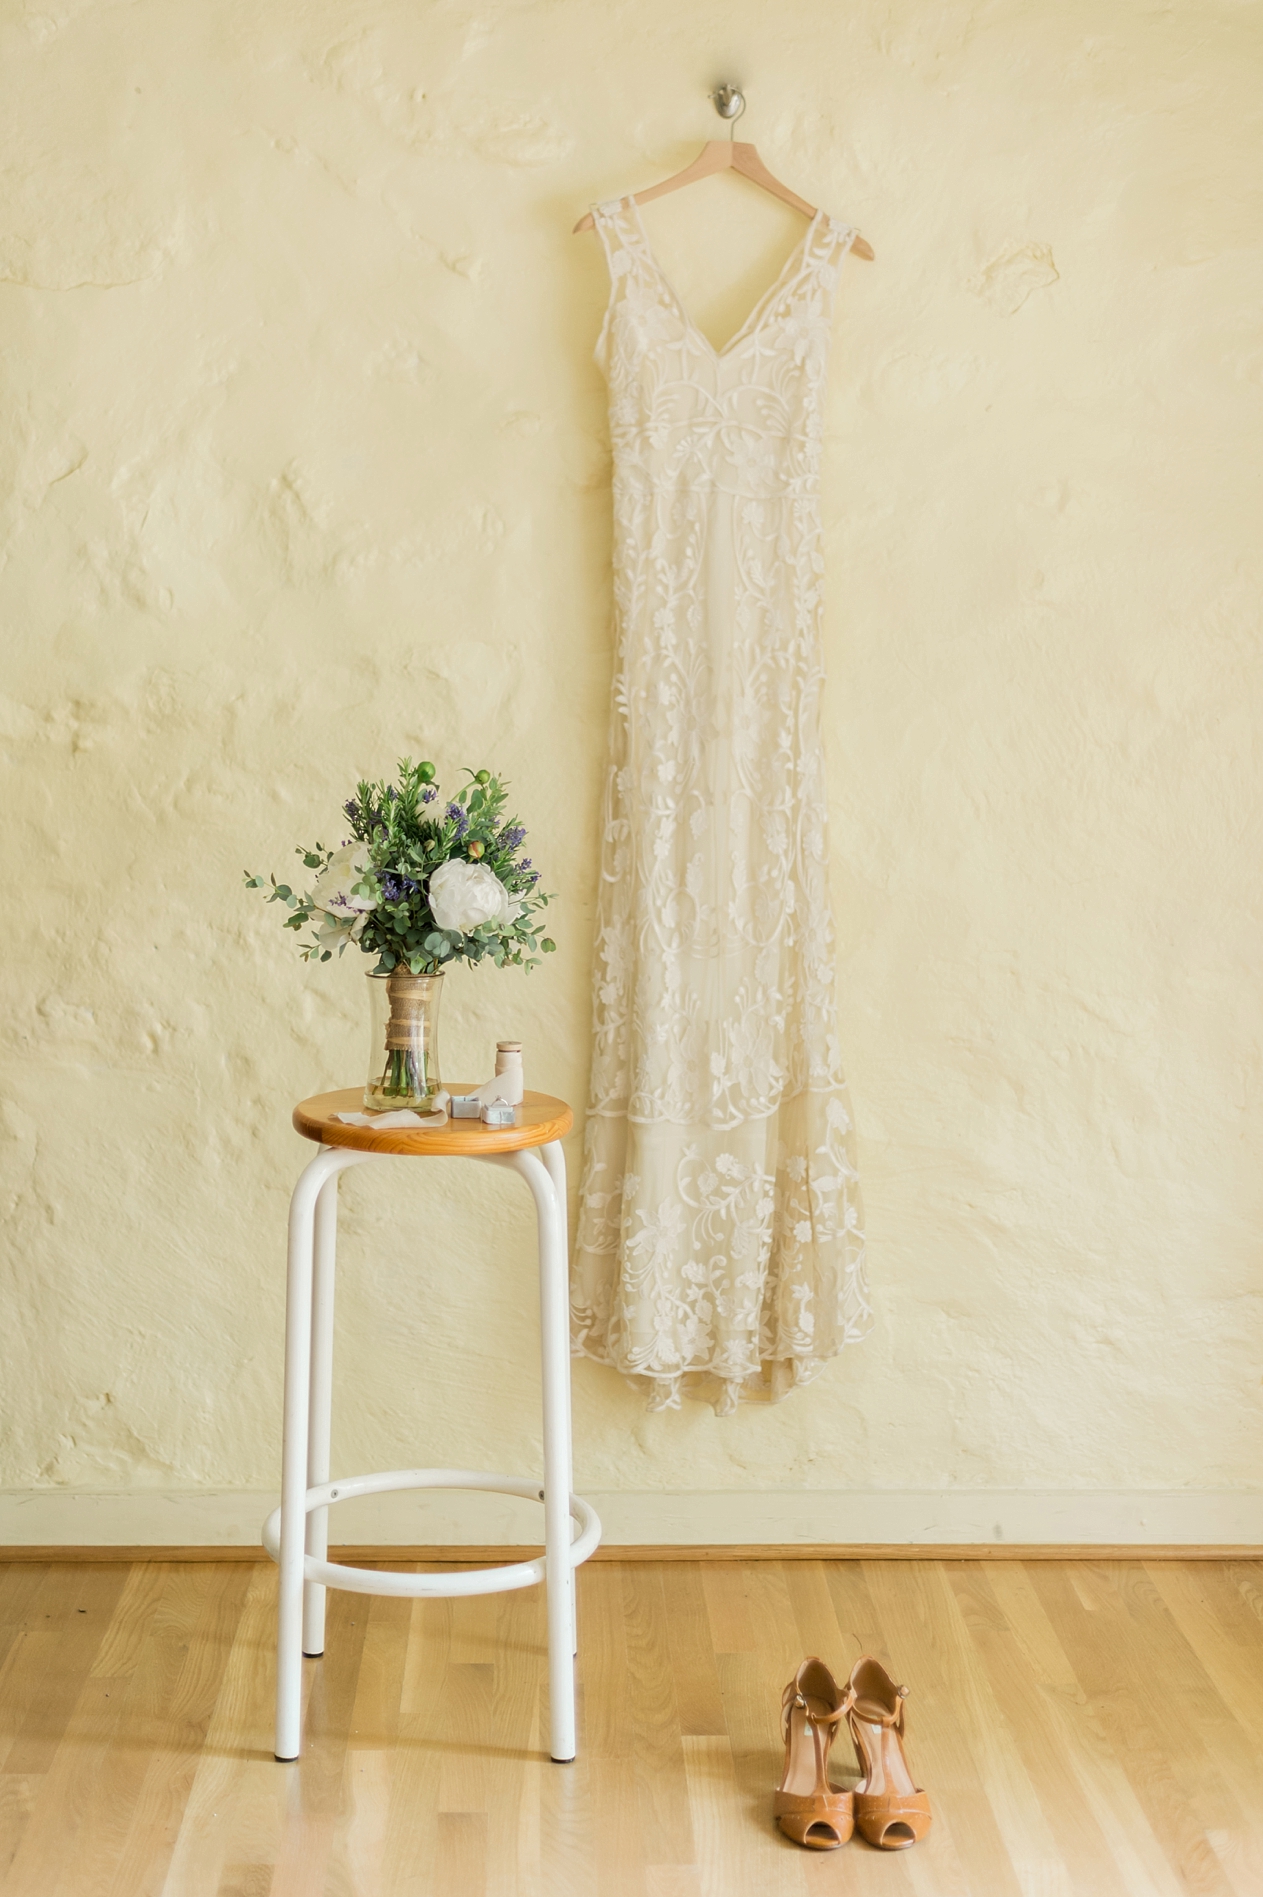 BHLDN gowns | A whimsical, Wilmington, Delaware Wedding for the bride who loves organic and natural details | East Coast + Destination Wedding Photographer | Lauren R Swann